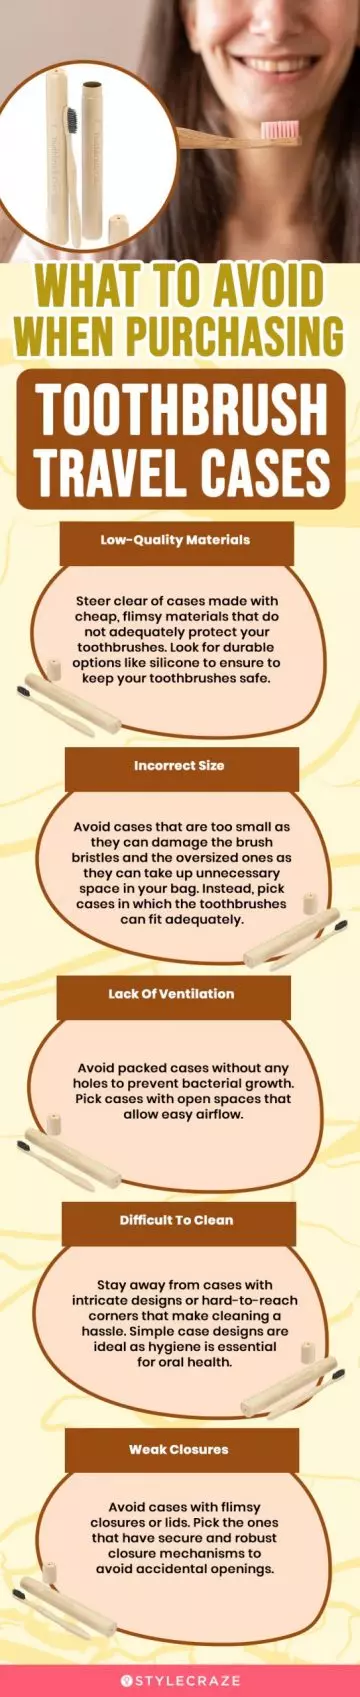 What To Avoid When Purchasing Toothbrush Travel Cases (infographic)